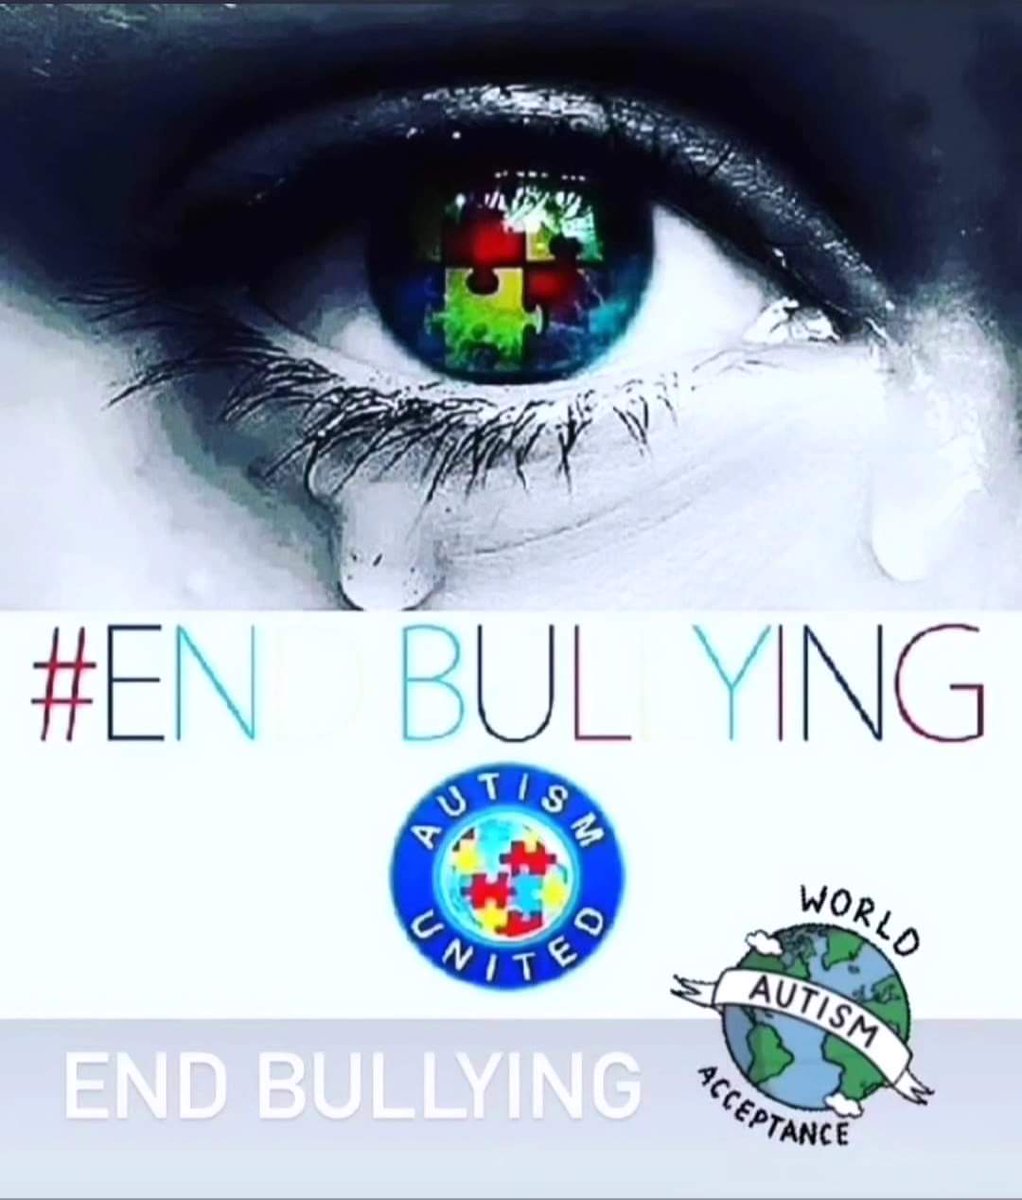 #endbullying Just so you know 🤔💙 #autismacceptance 🙌🏽 Every day is autism awareness day in our house. #autism #autismdad #autismawareness #autismawarenessmonth #autismfamily #autismparent #autismrocks #differentnotless 🙋🏽‍♂️🙋‍♀️ Let's Band together to raise awareness 🙏❤💙👊🌍🫶🏾